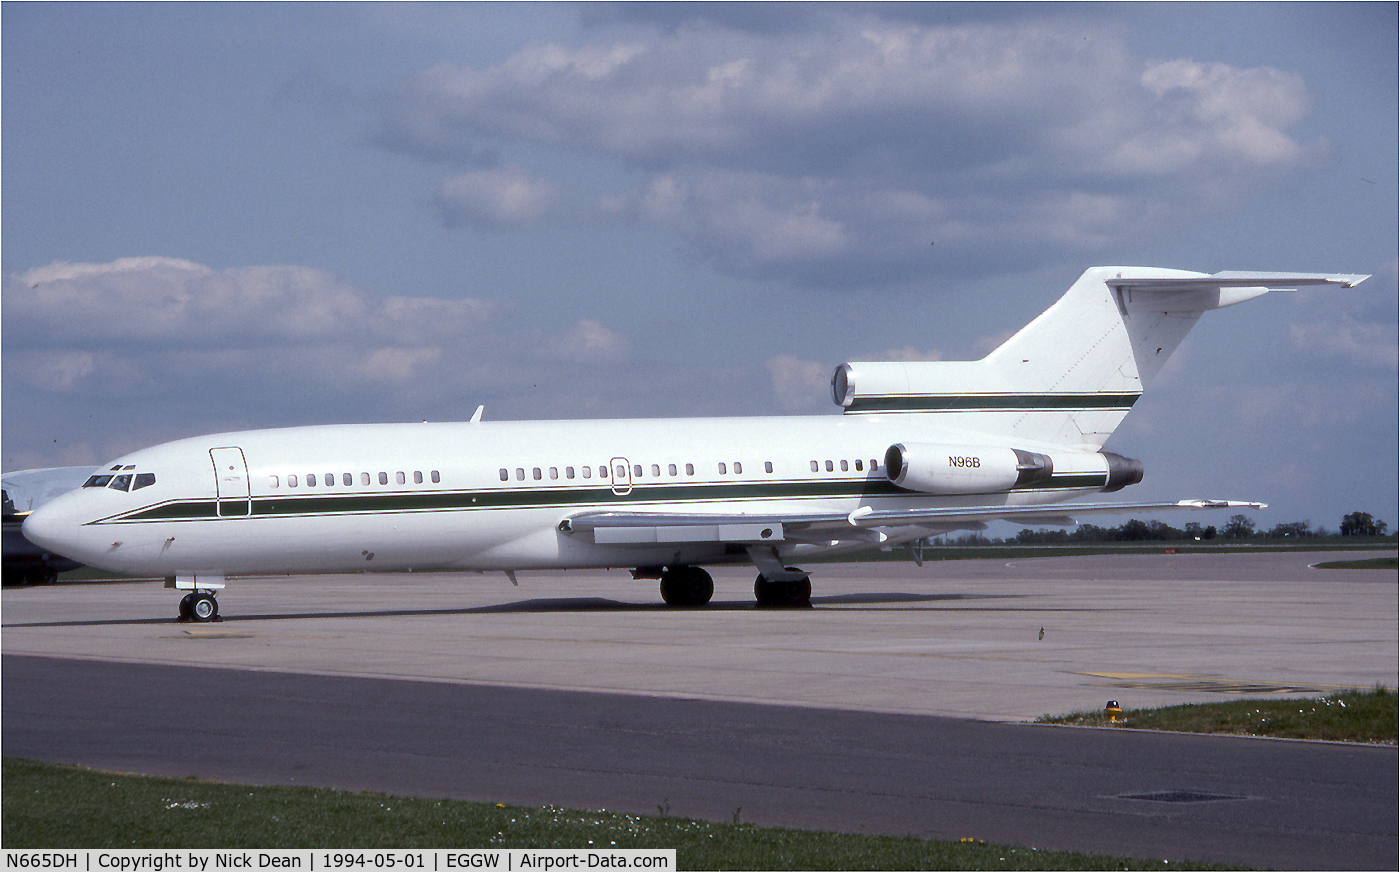 N665DH, 1964 Boeing 727-30 C/N 18365, EGGW (Seen hear carrying N96B and currently registered as posted N665DH)